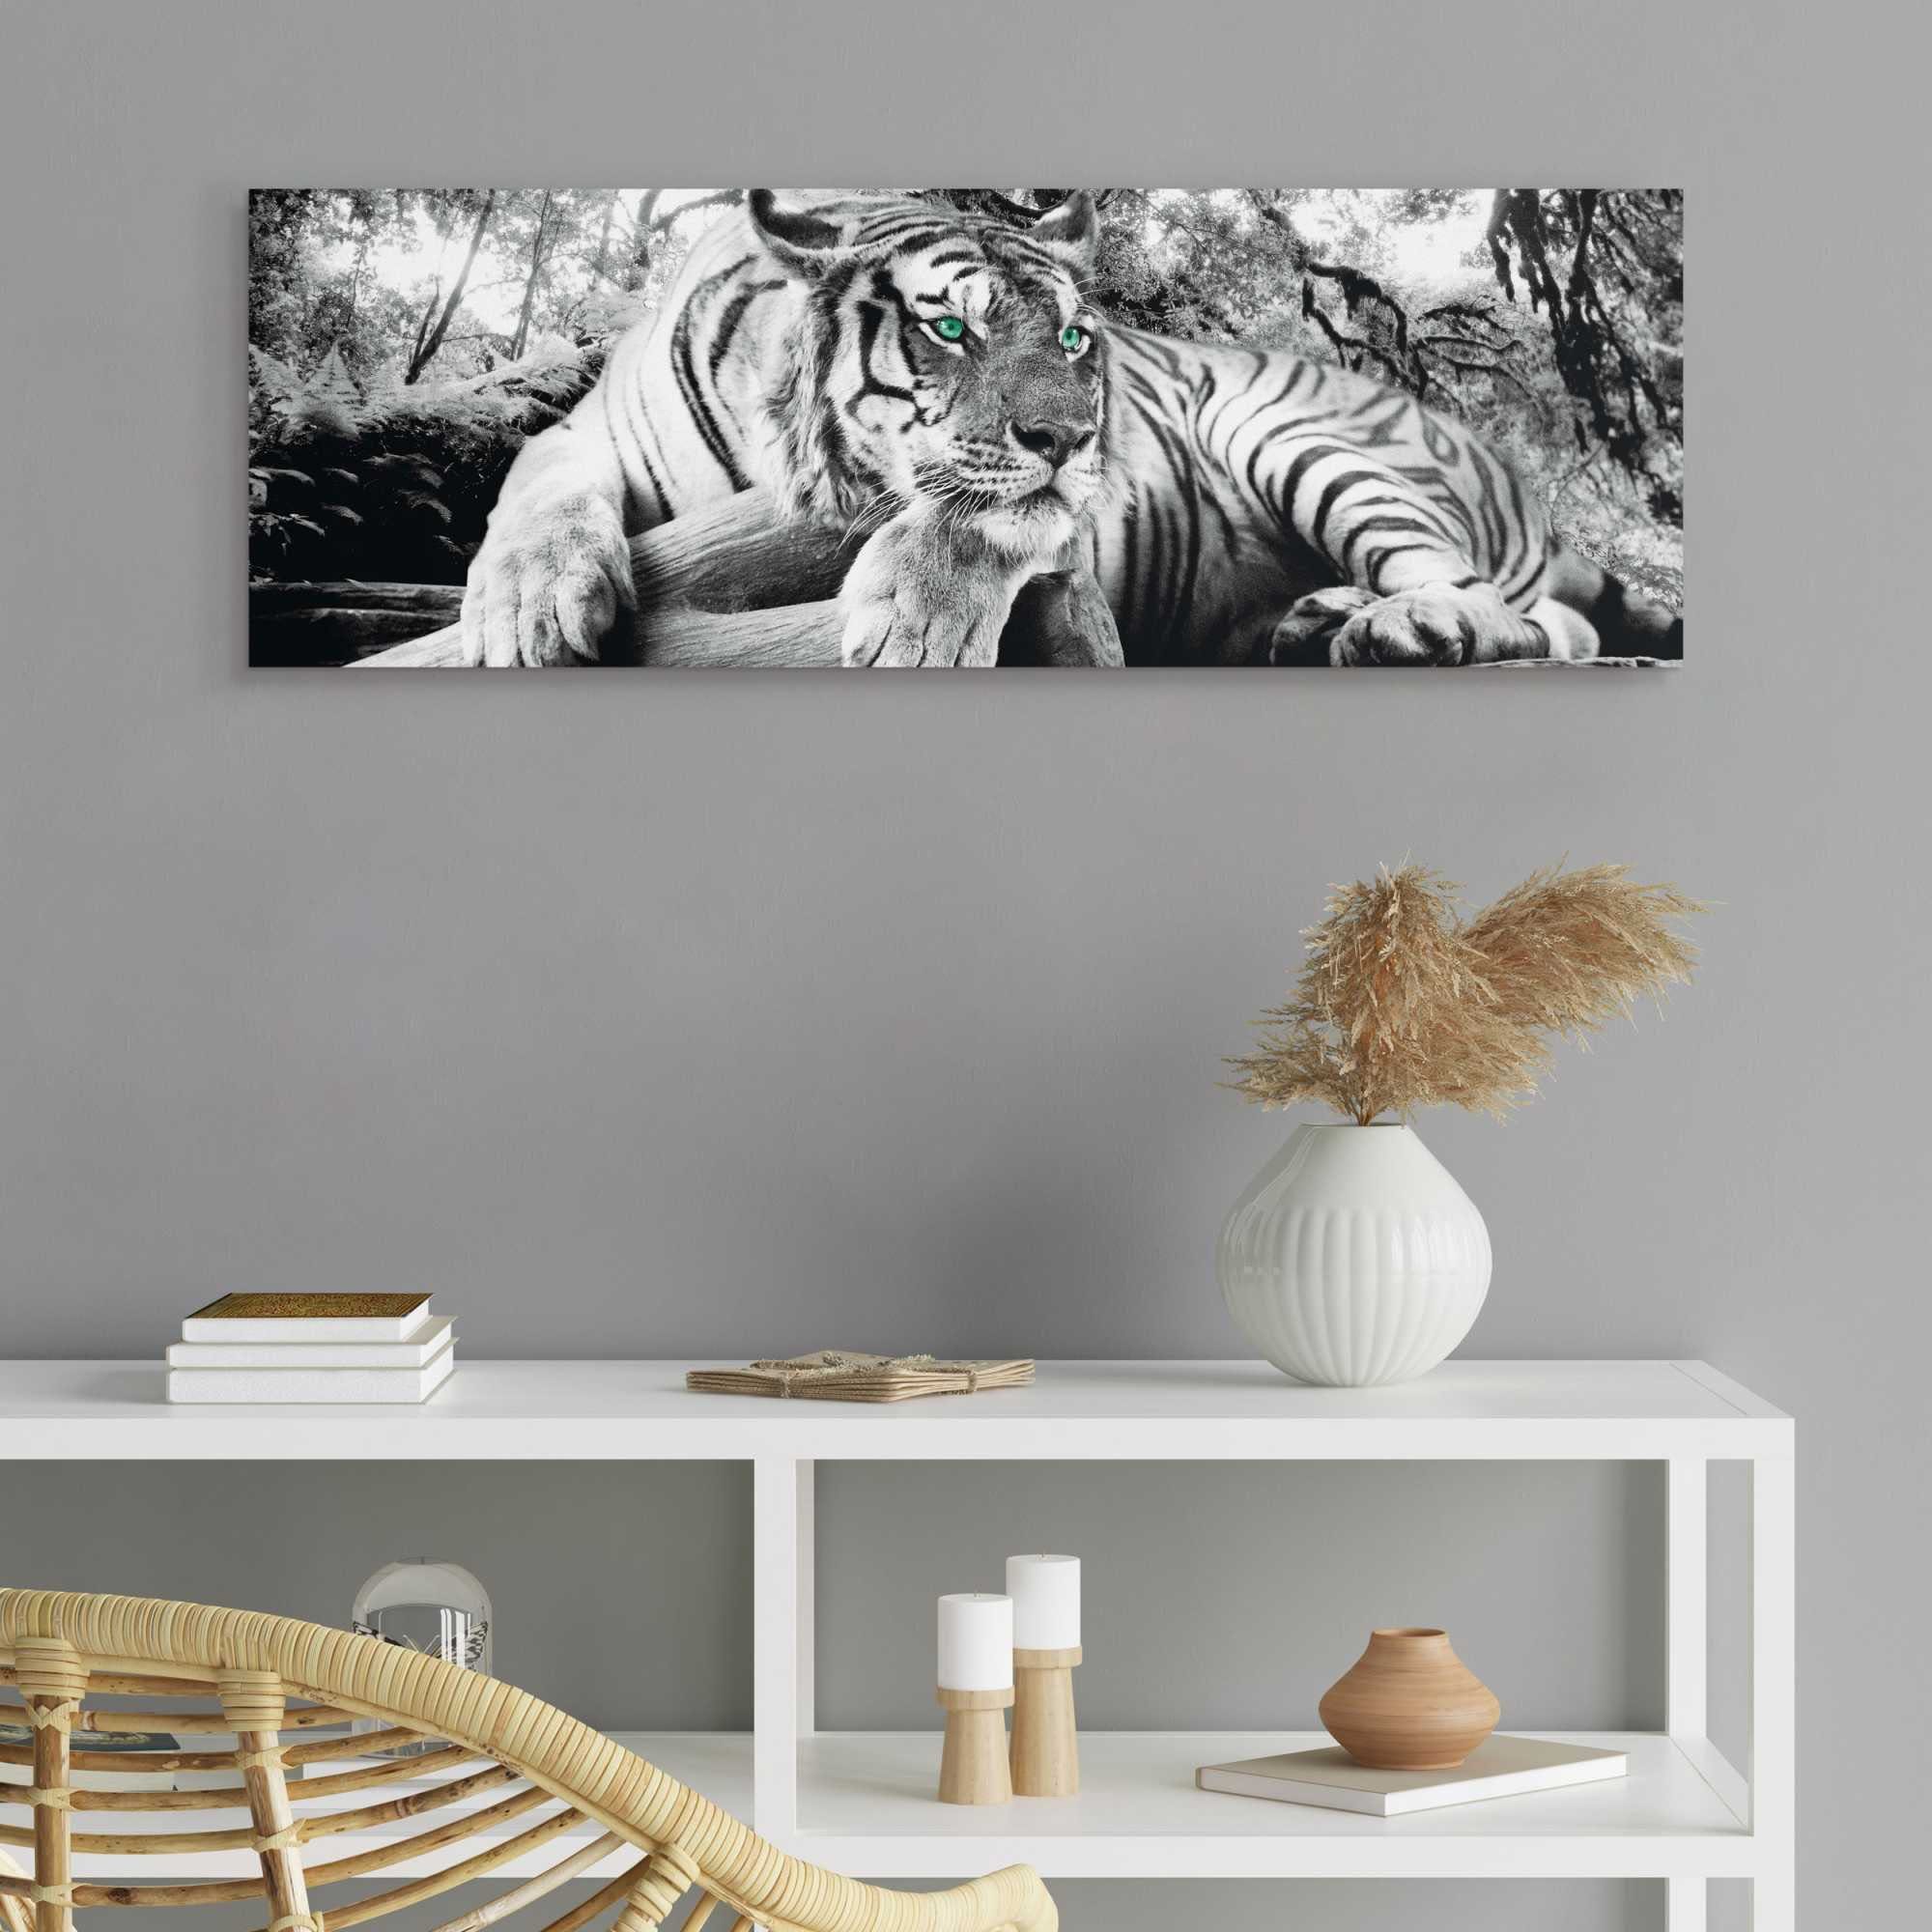 Home affaire Deco-Panel Tiger guckt dich an